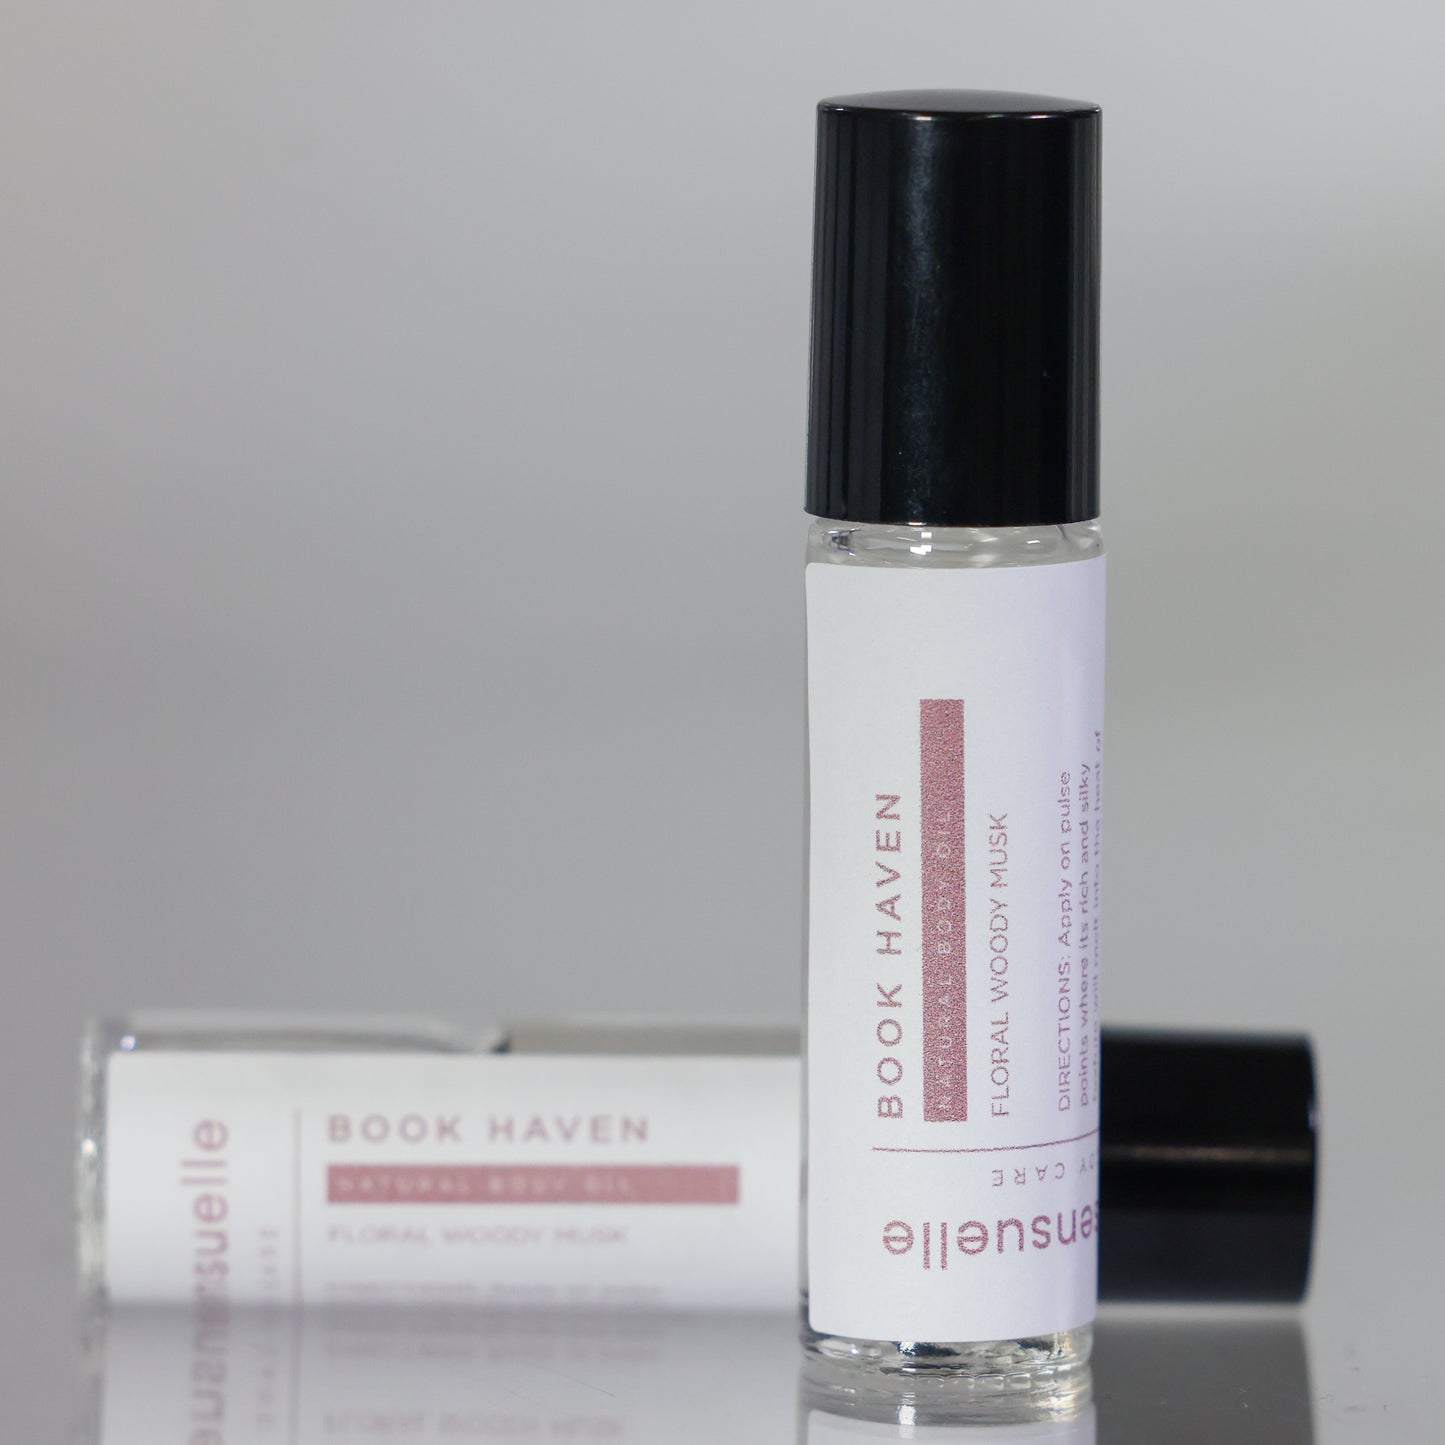 Book Haven Roll On Perfume Oil (Inspired By Byredo Bibliotheque)